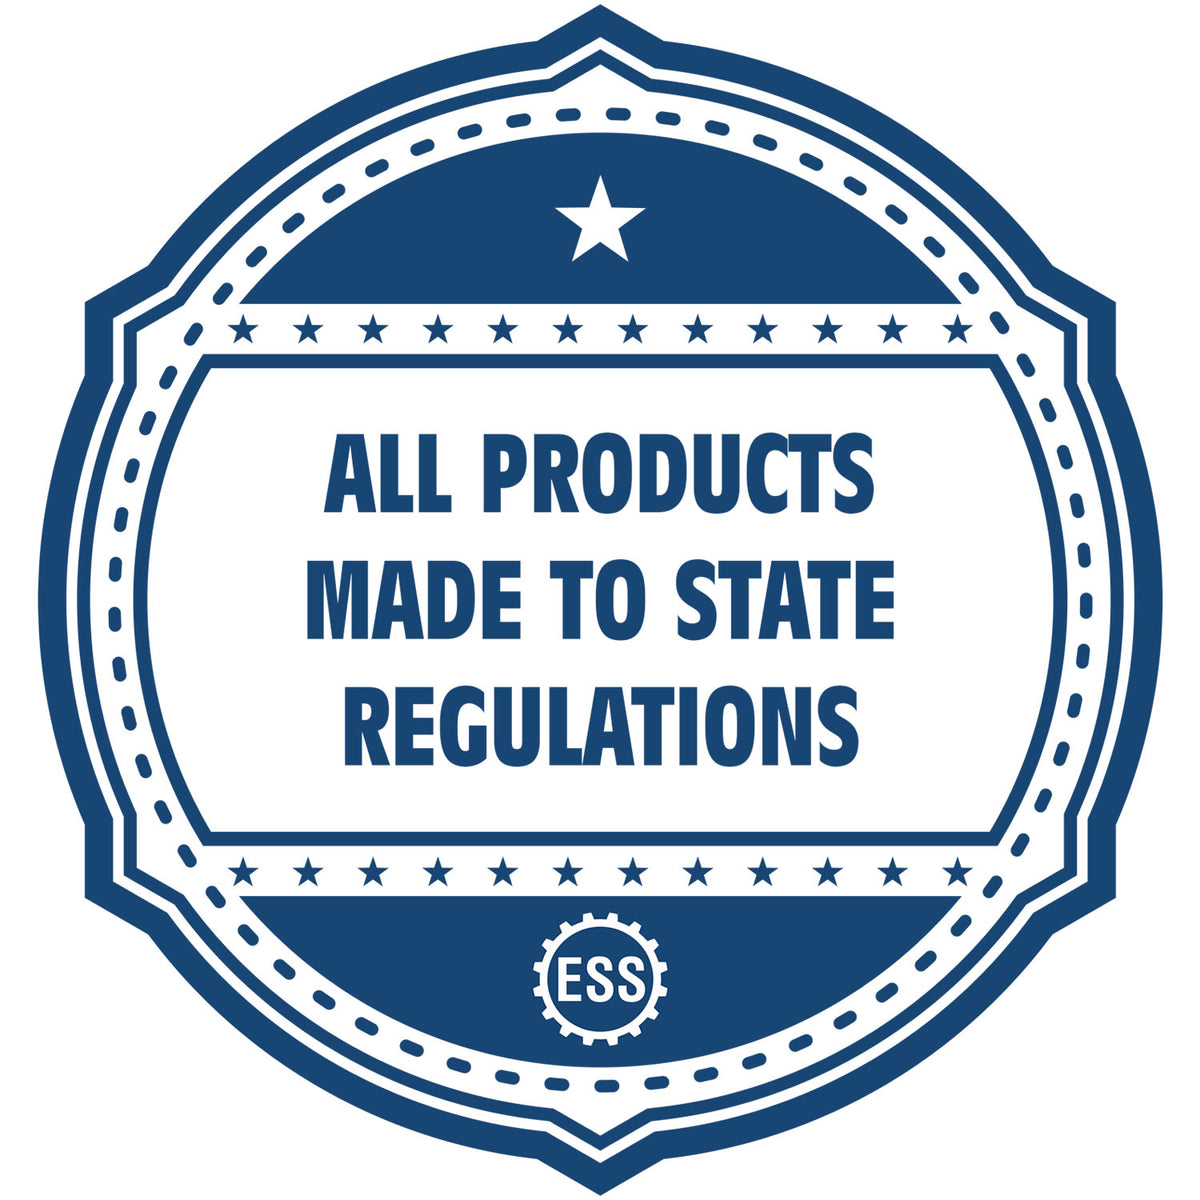 An icon or badge element for the Handheld Massachusetts Professional Engineer Embosser showing that this product is made in compliance with state regulations.